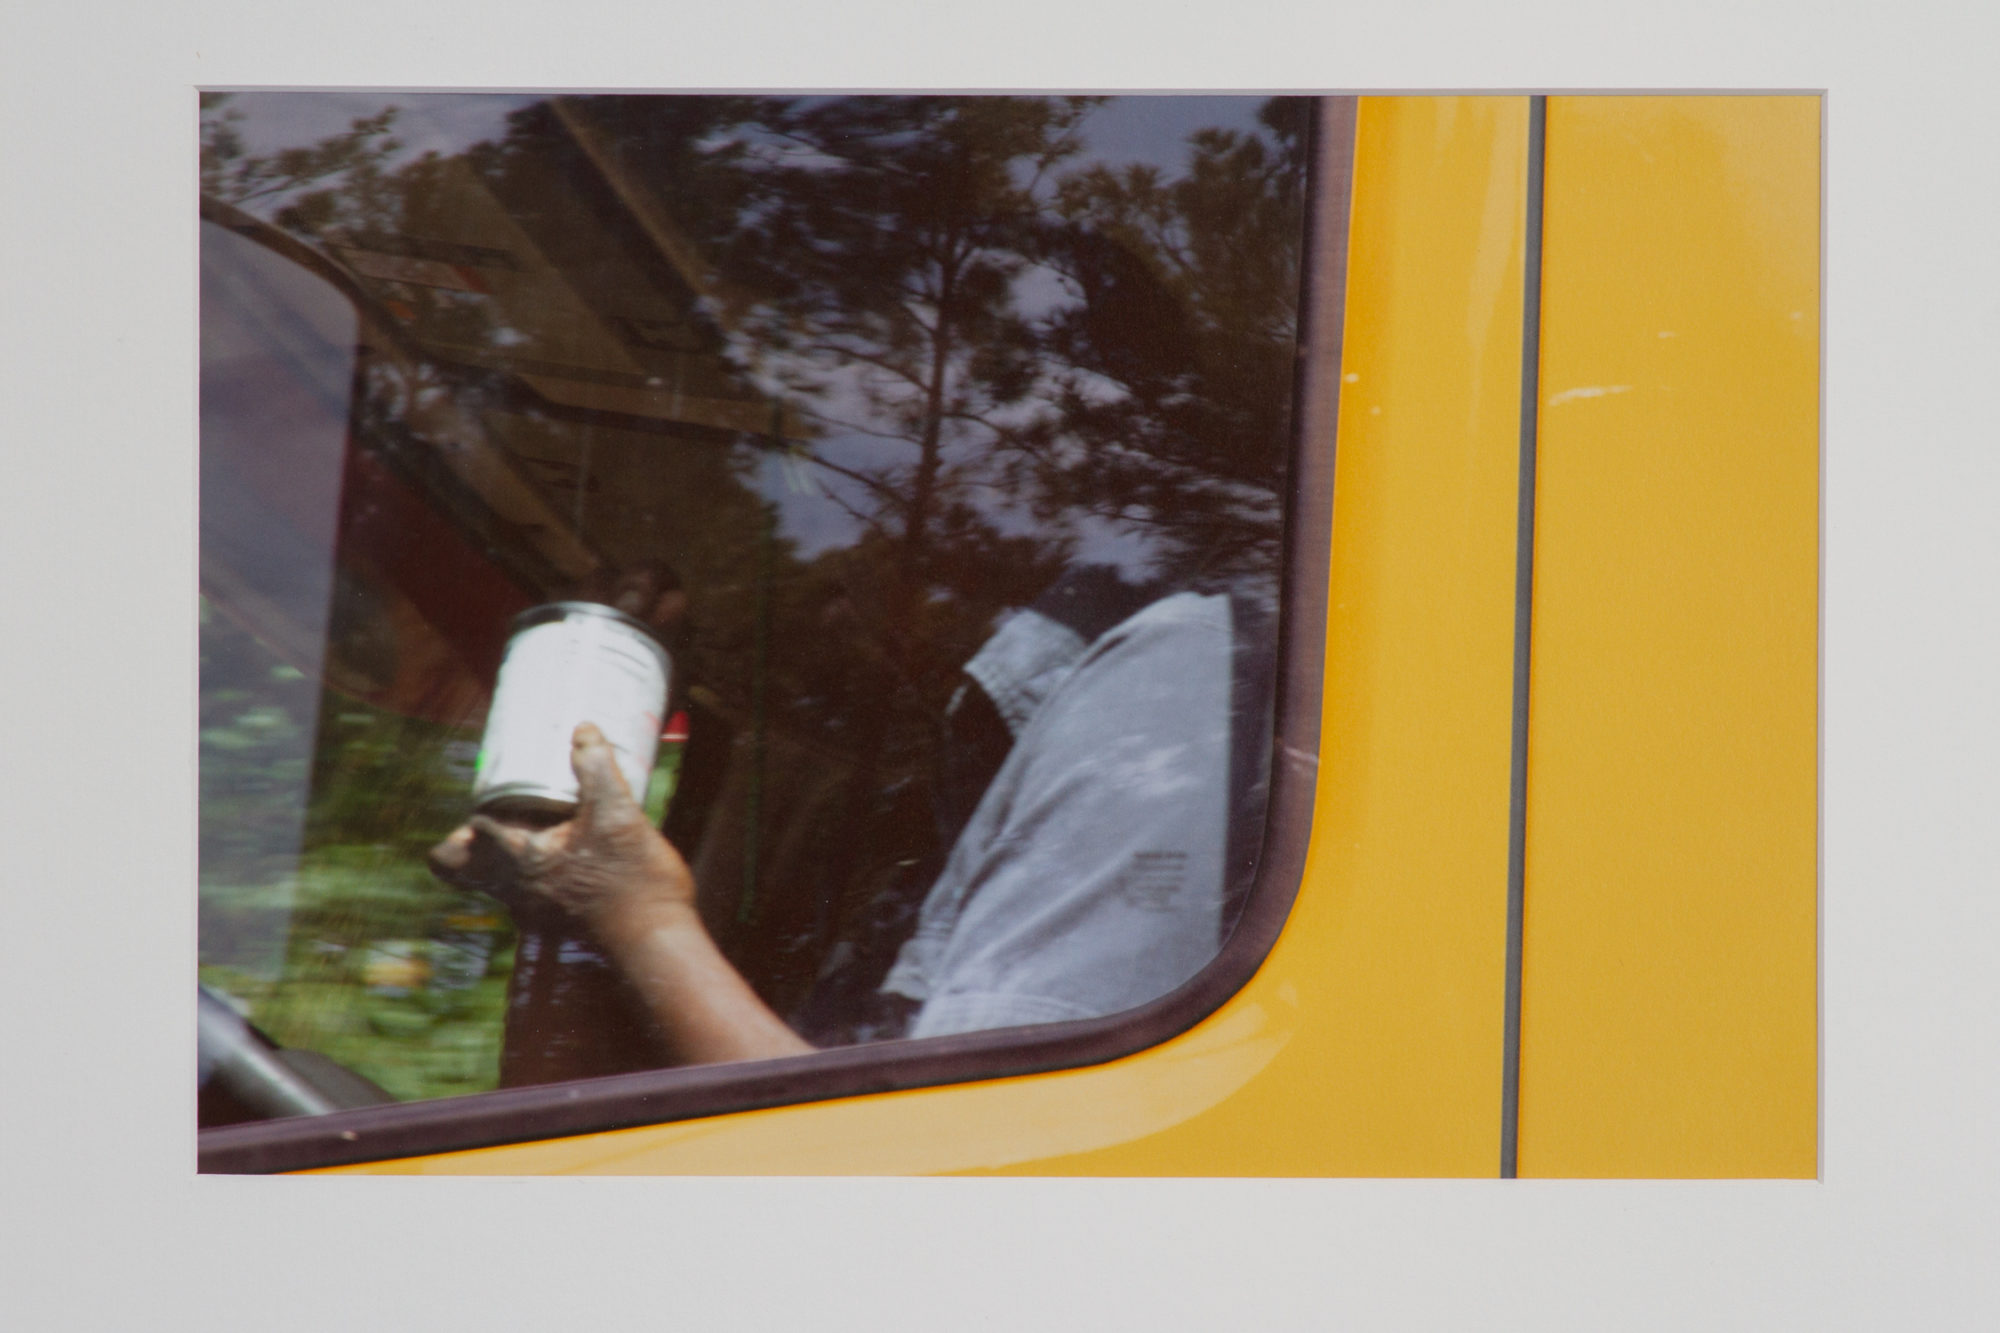 An angled up view of a truck window. The truck is yellow. A person's arm is in view but their face is in the shadows. They are holding a can. The view is distorted by the reflection of trees.